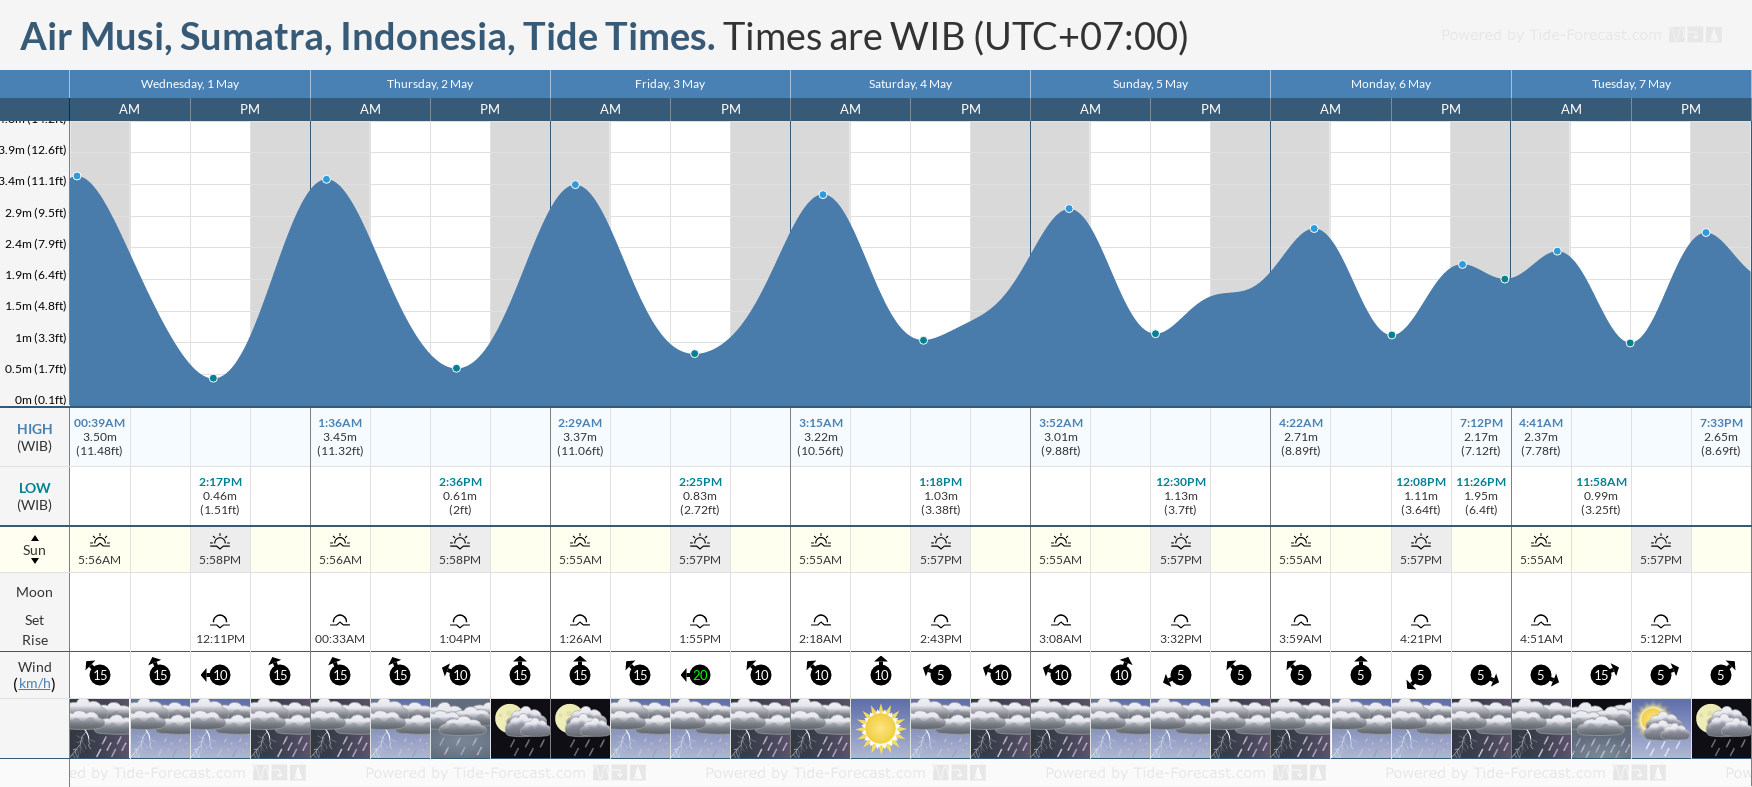 Air Musi, Sumatra, Indonesia Tide Chart including high and low tide tide times for the next 7 days